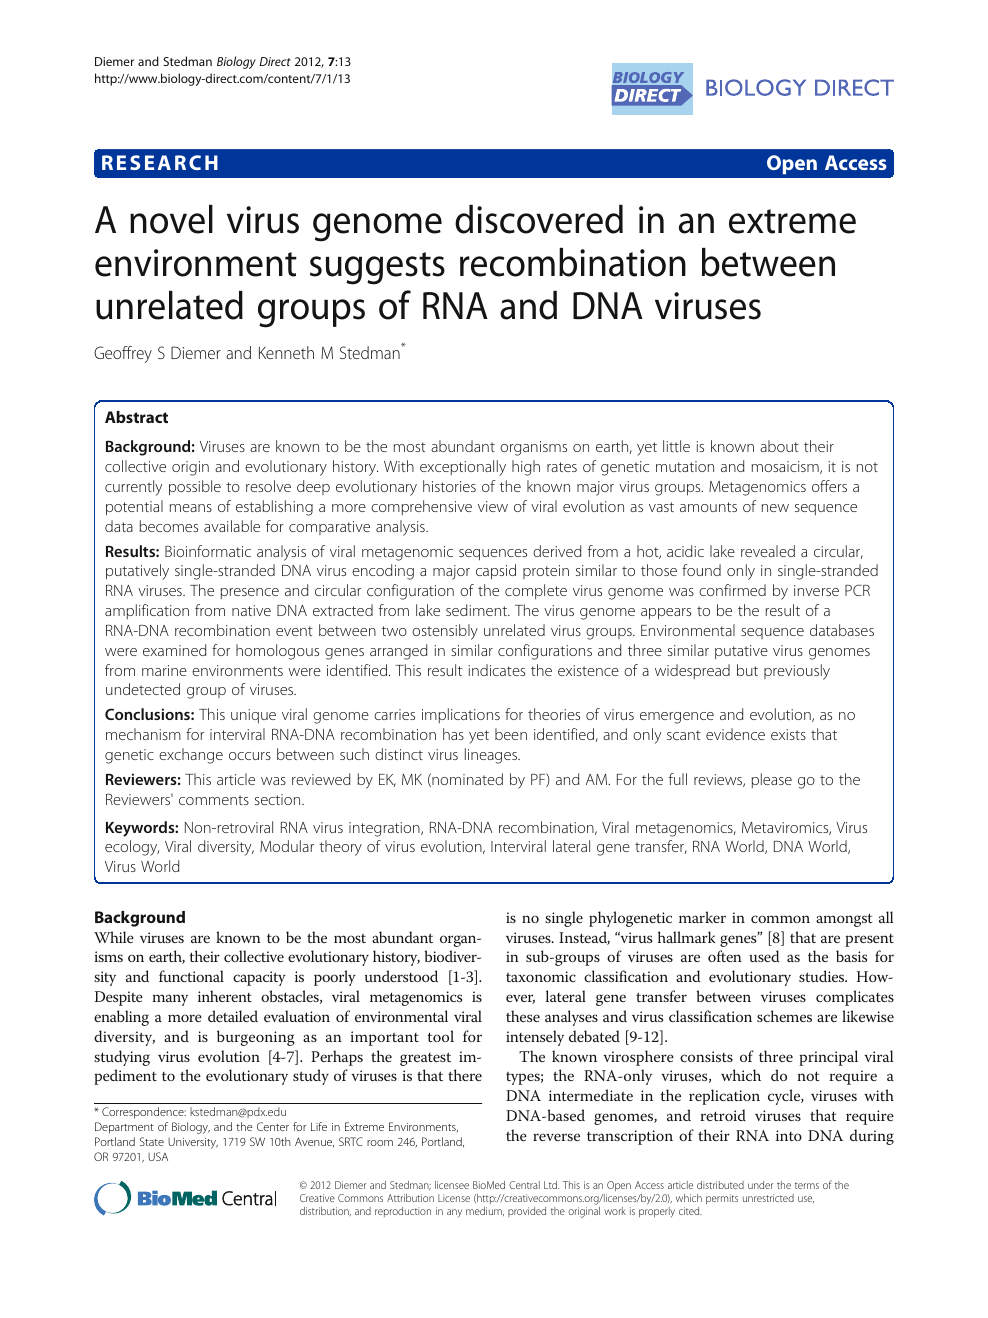 A Novel Virus Genome Discovered In An Extreme Environment Suggests Recombination Between Unrelated Groups Of Rna And Dna Viruses Topic Of Research Paper In Biological Sciences Download Scholarly Article Pdf And